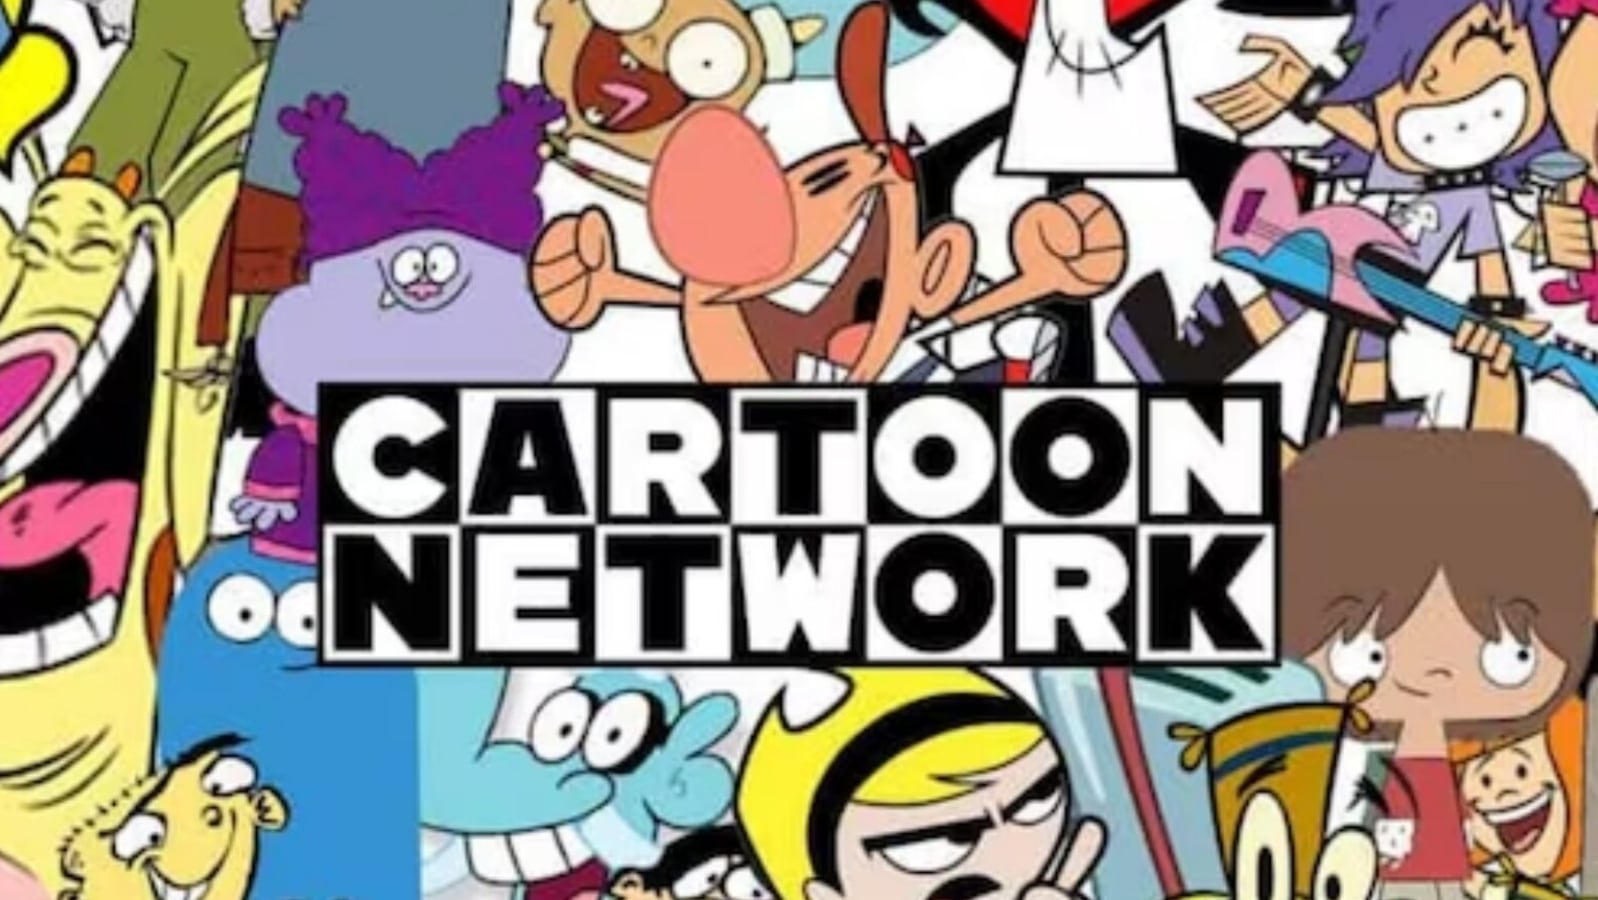 We are not dead: Cartoon Network's statement